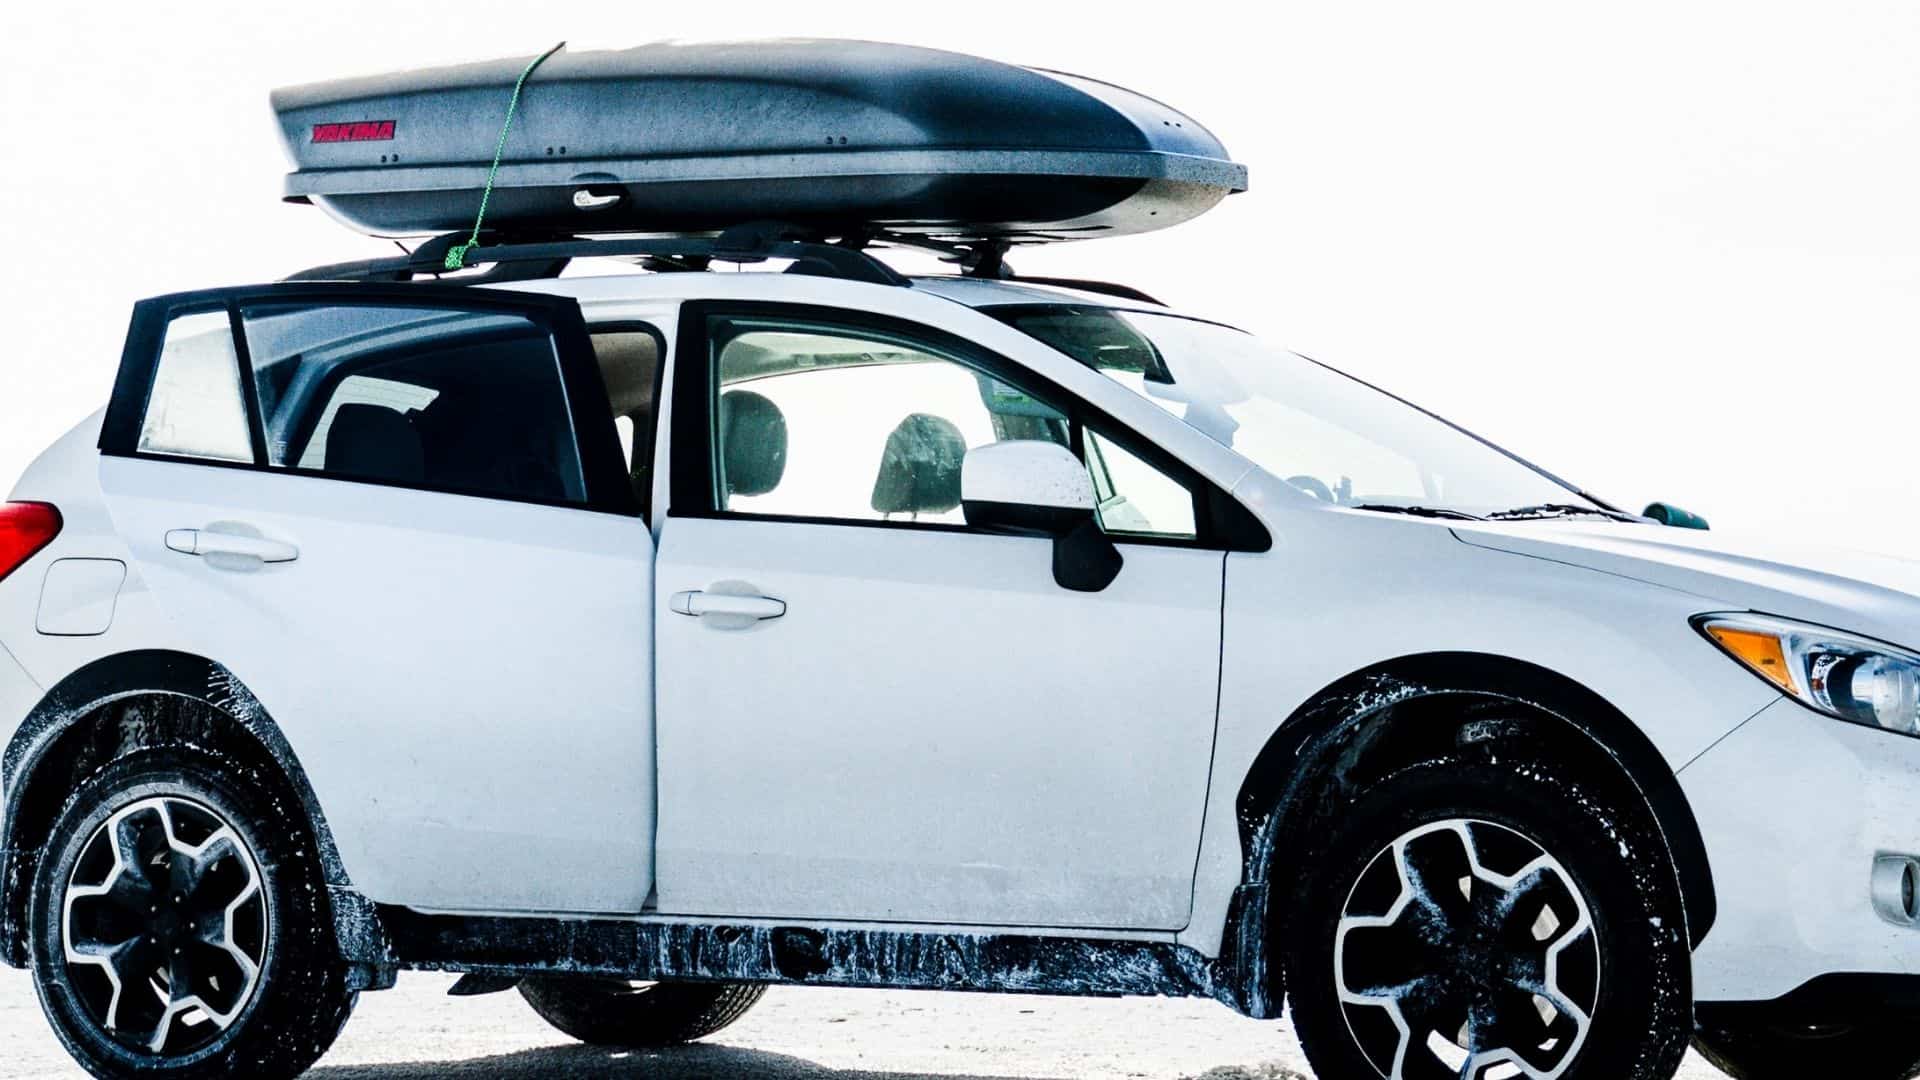 Best Cargo Roof Boxes For Camping, Fishing, Skiing, hunting, hiking, and road trips